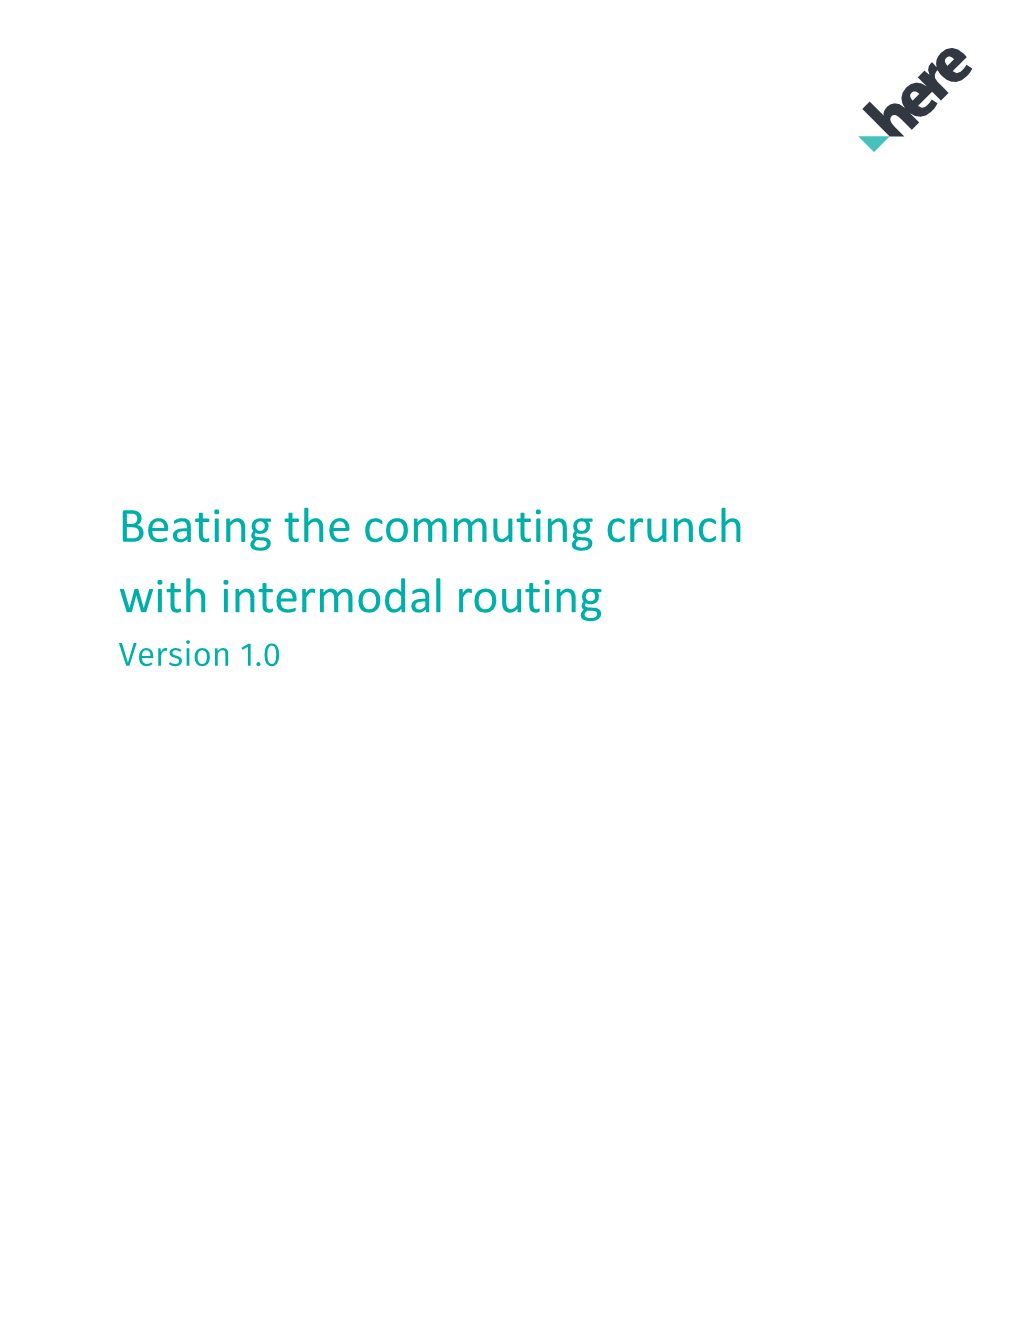 Beating the Commuting Crunch with Intermodal Routing Version 1.0